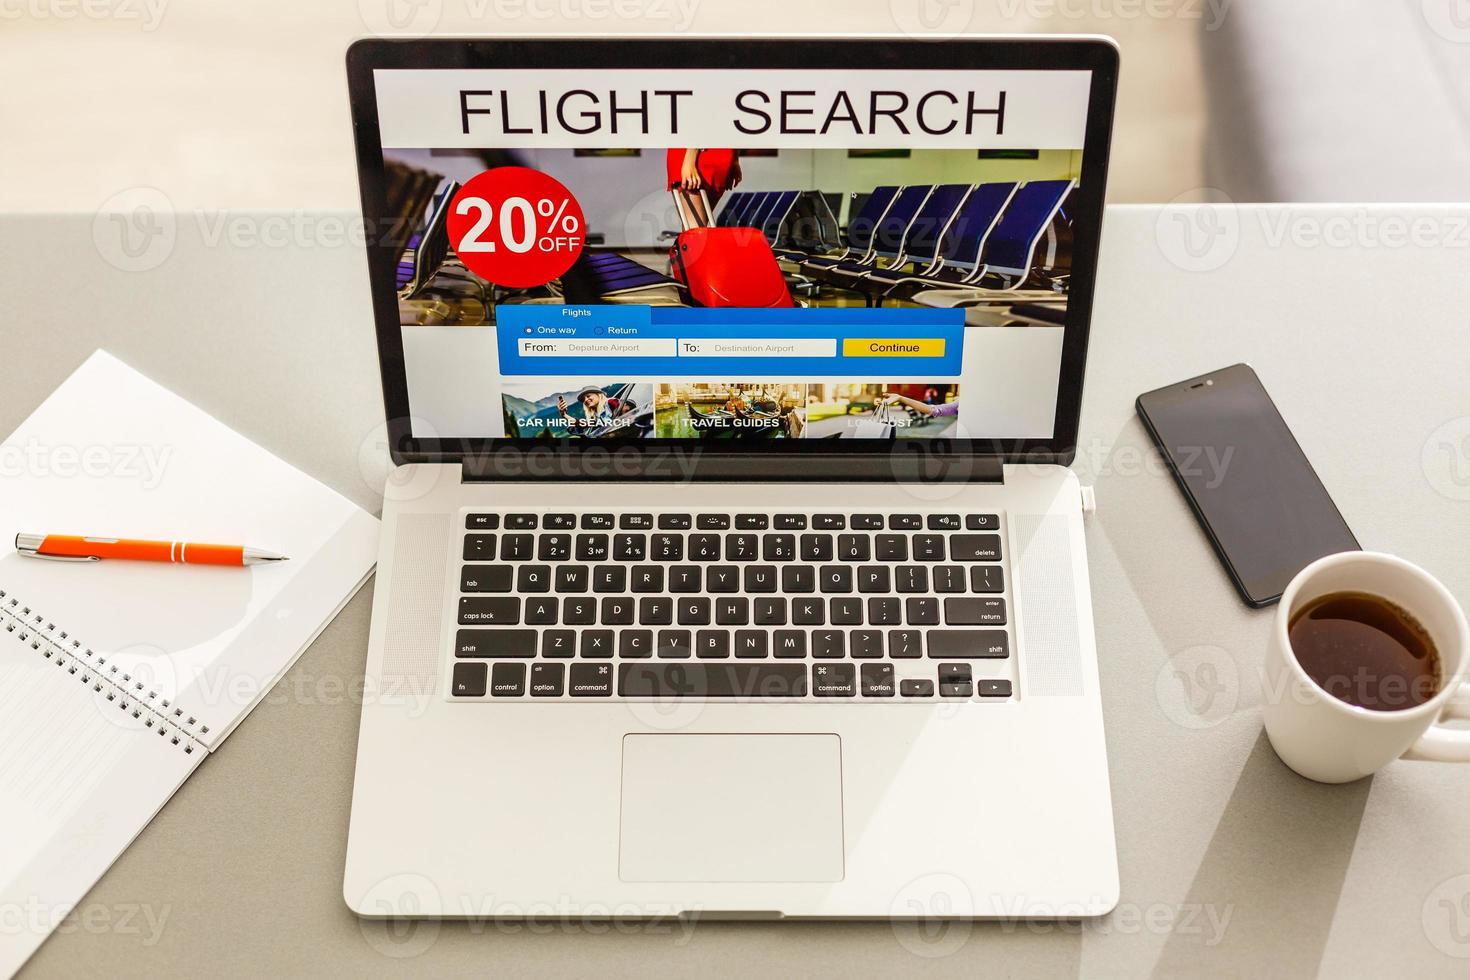 Flights online booking and reservation. Search flights on a computer laptop screen, office desk background. photo